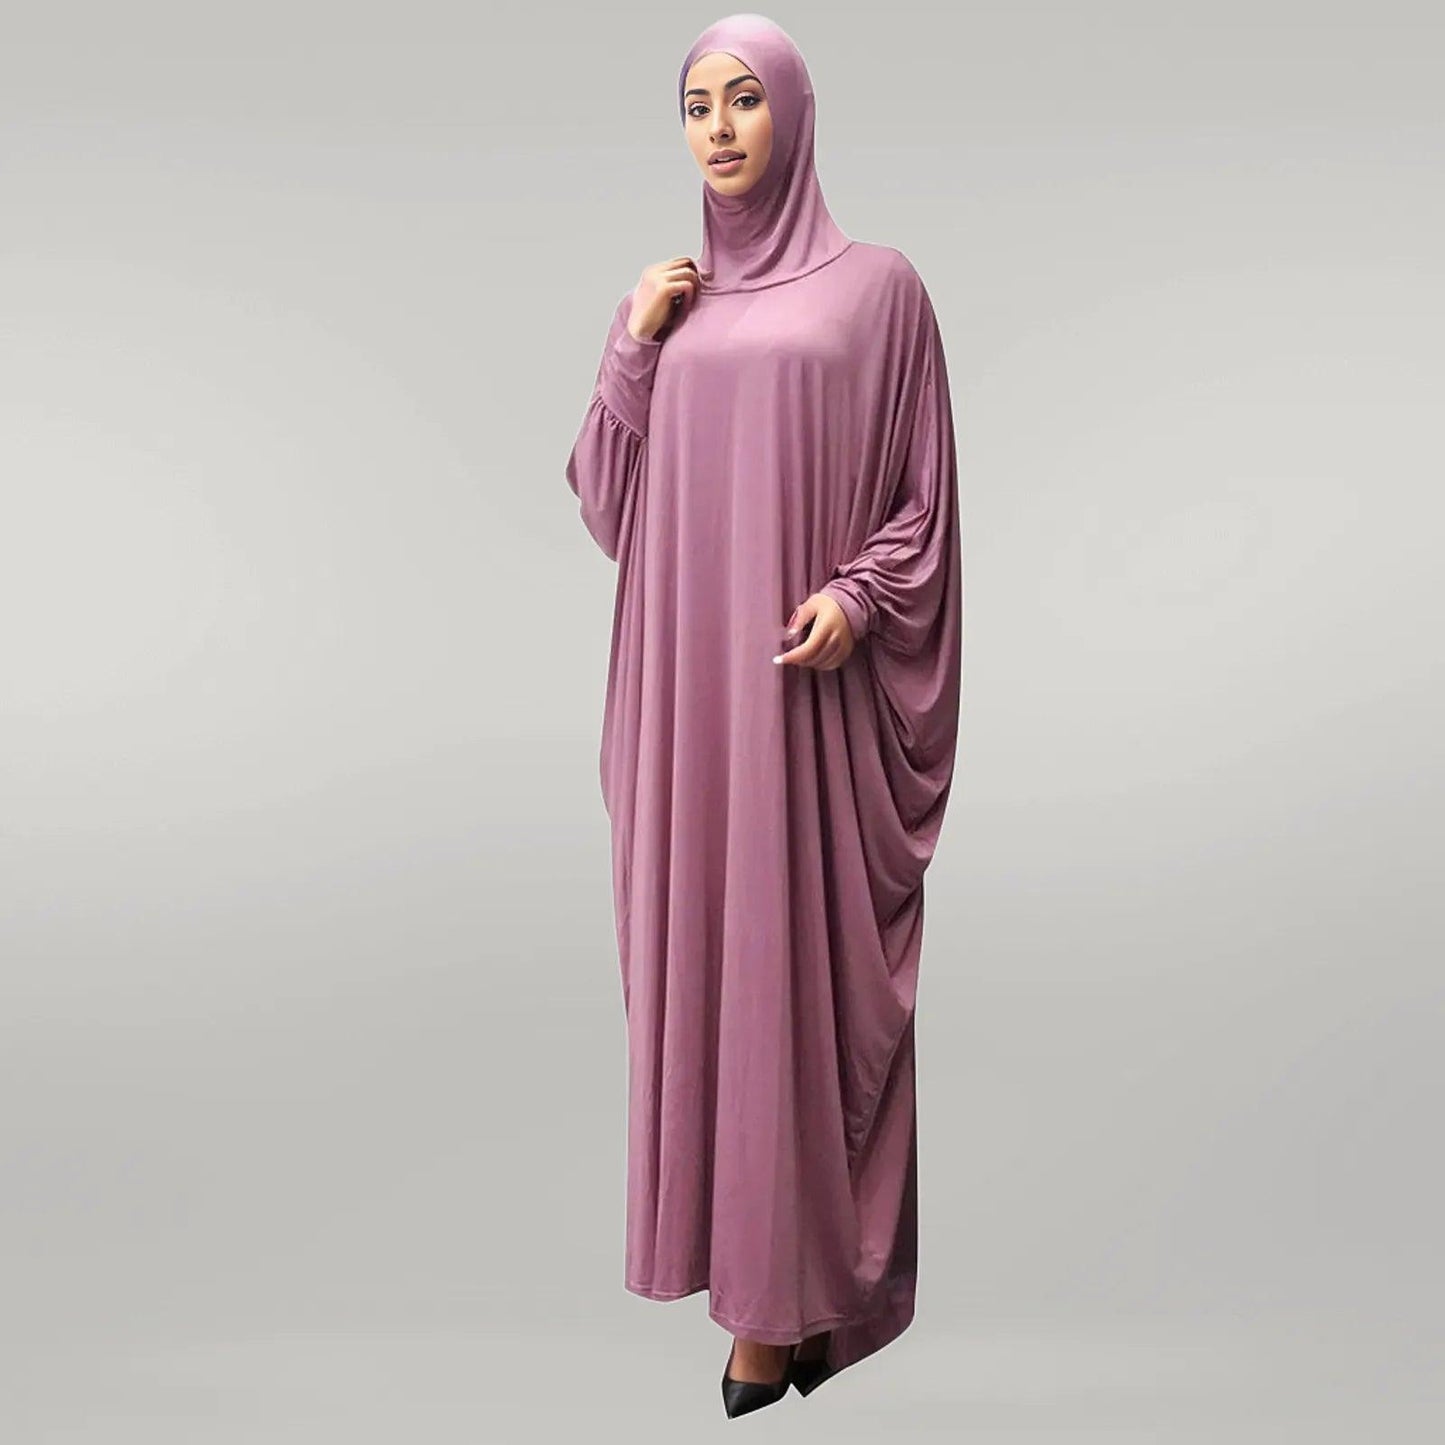 Butterfly Style Abaya in Dark Pink and Light Brown Color